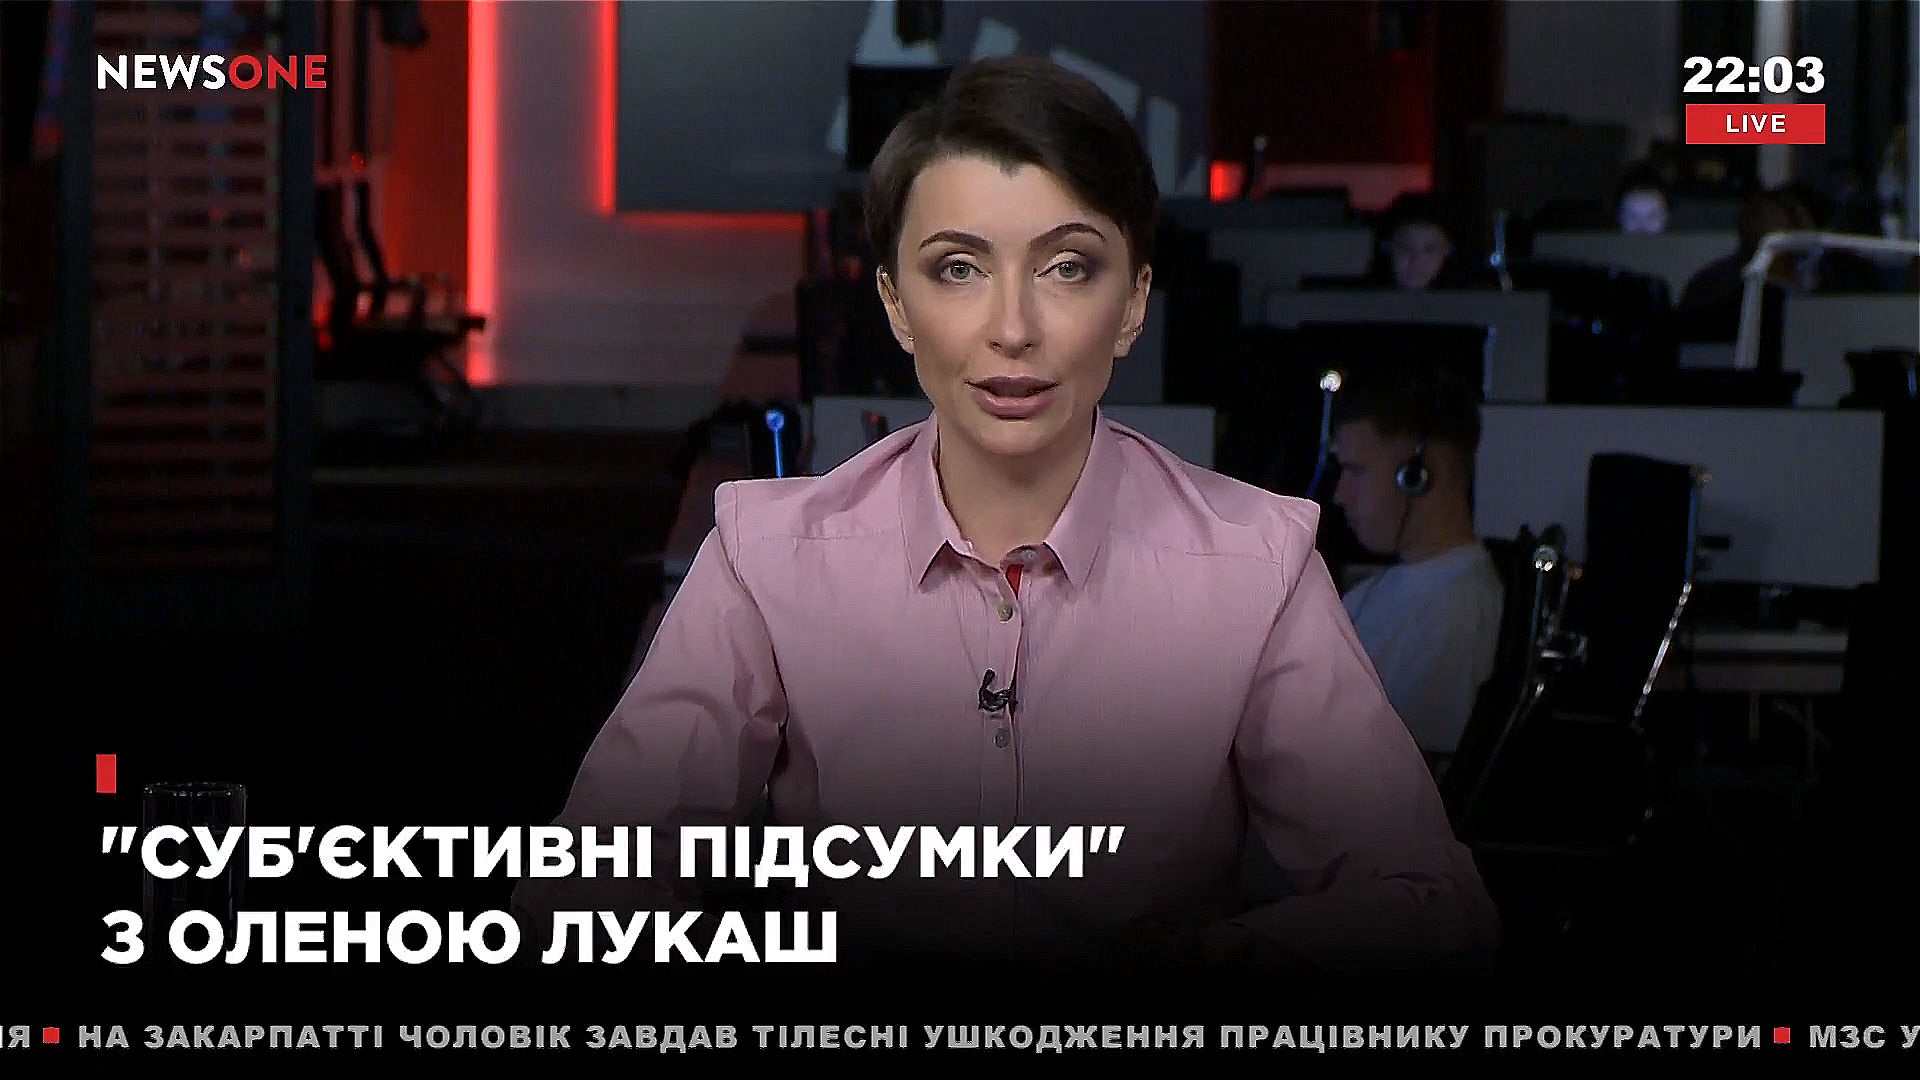 Criminal proceedings were opened against another ex-Minister of Justice, Olena Lukash. However, now she is free as so far the investigation has found no evidence of her guilt. Now she hosts a talk-show on the Ukrainian TV channel NewsOne. Photo: newsone.ua ~